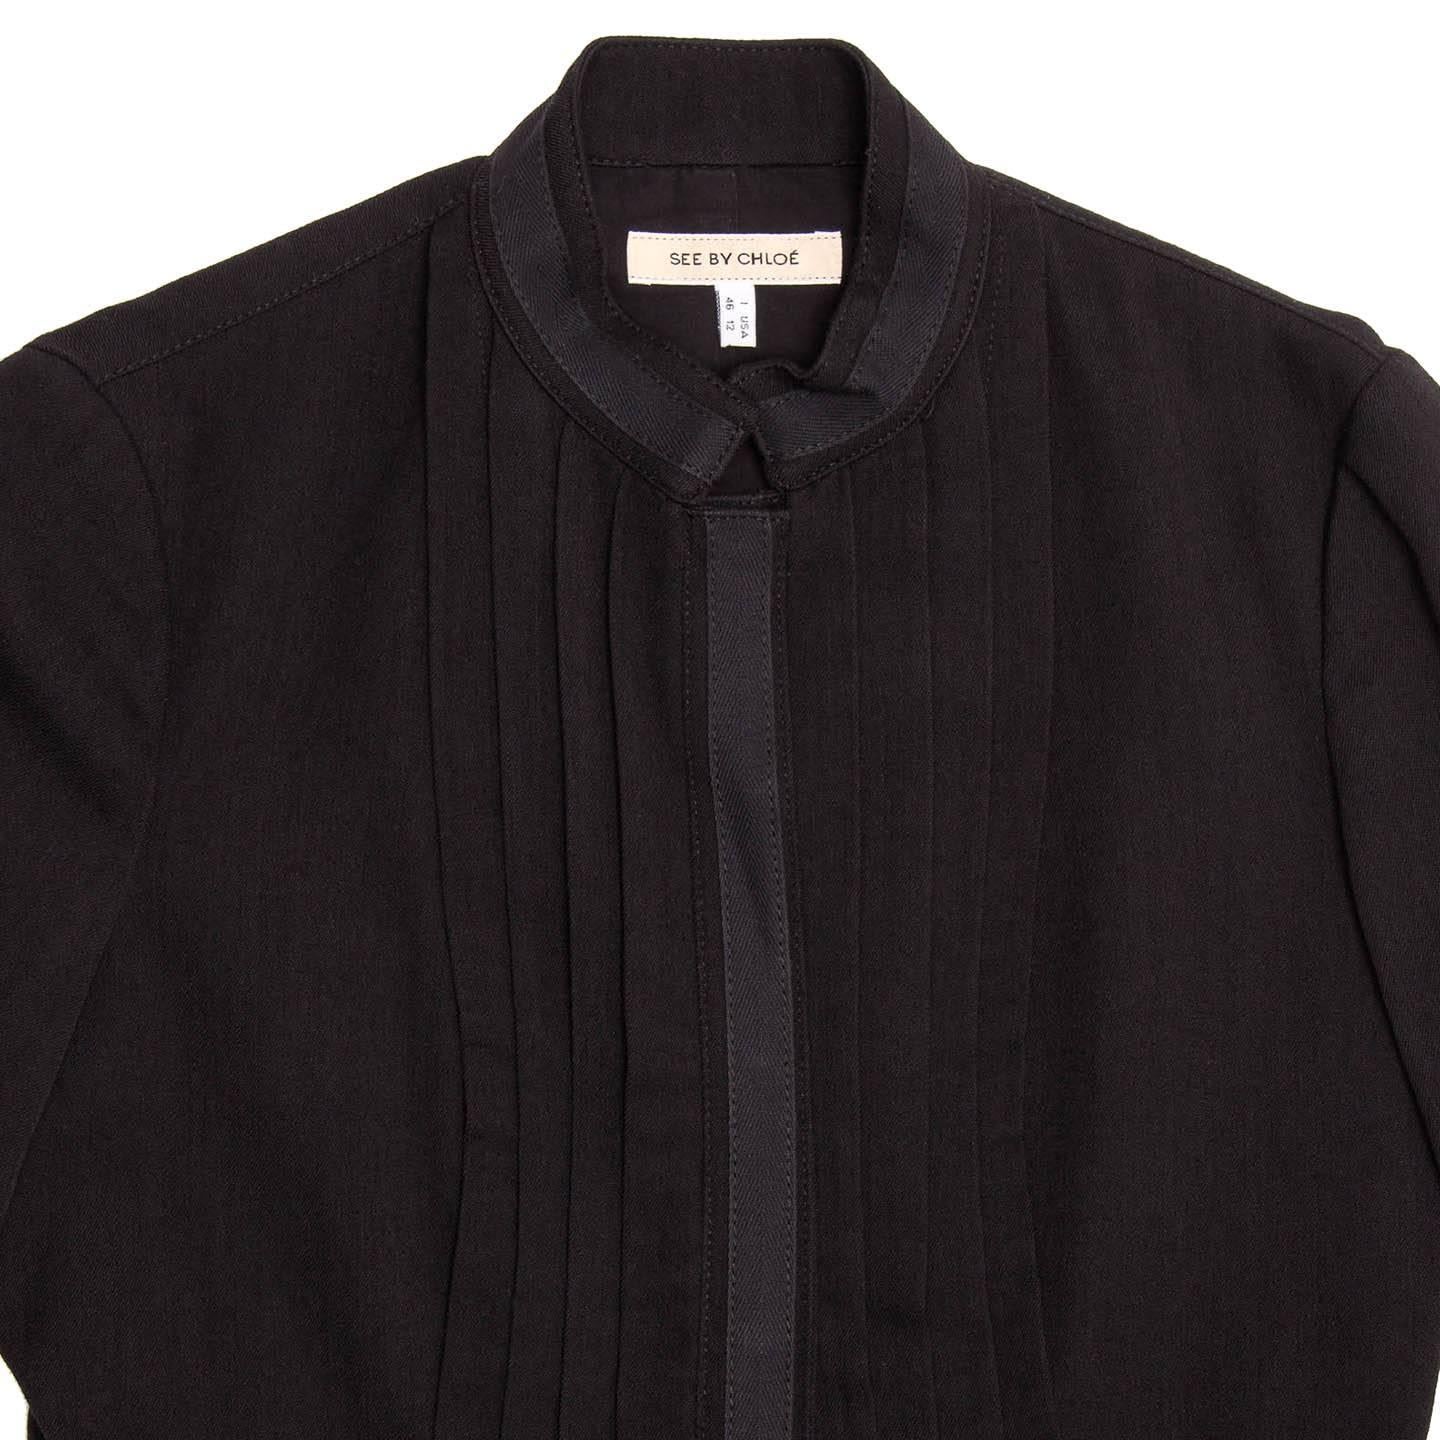 See by Chloe' Black Bellboy Cut Jacket In New Condition For Sale In Brooklyn, NY